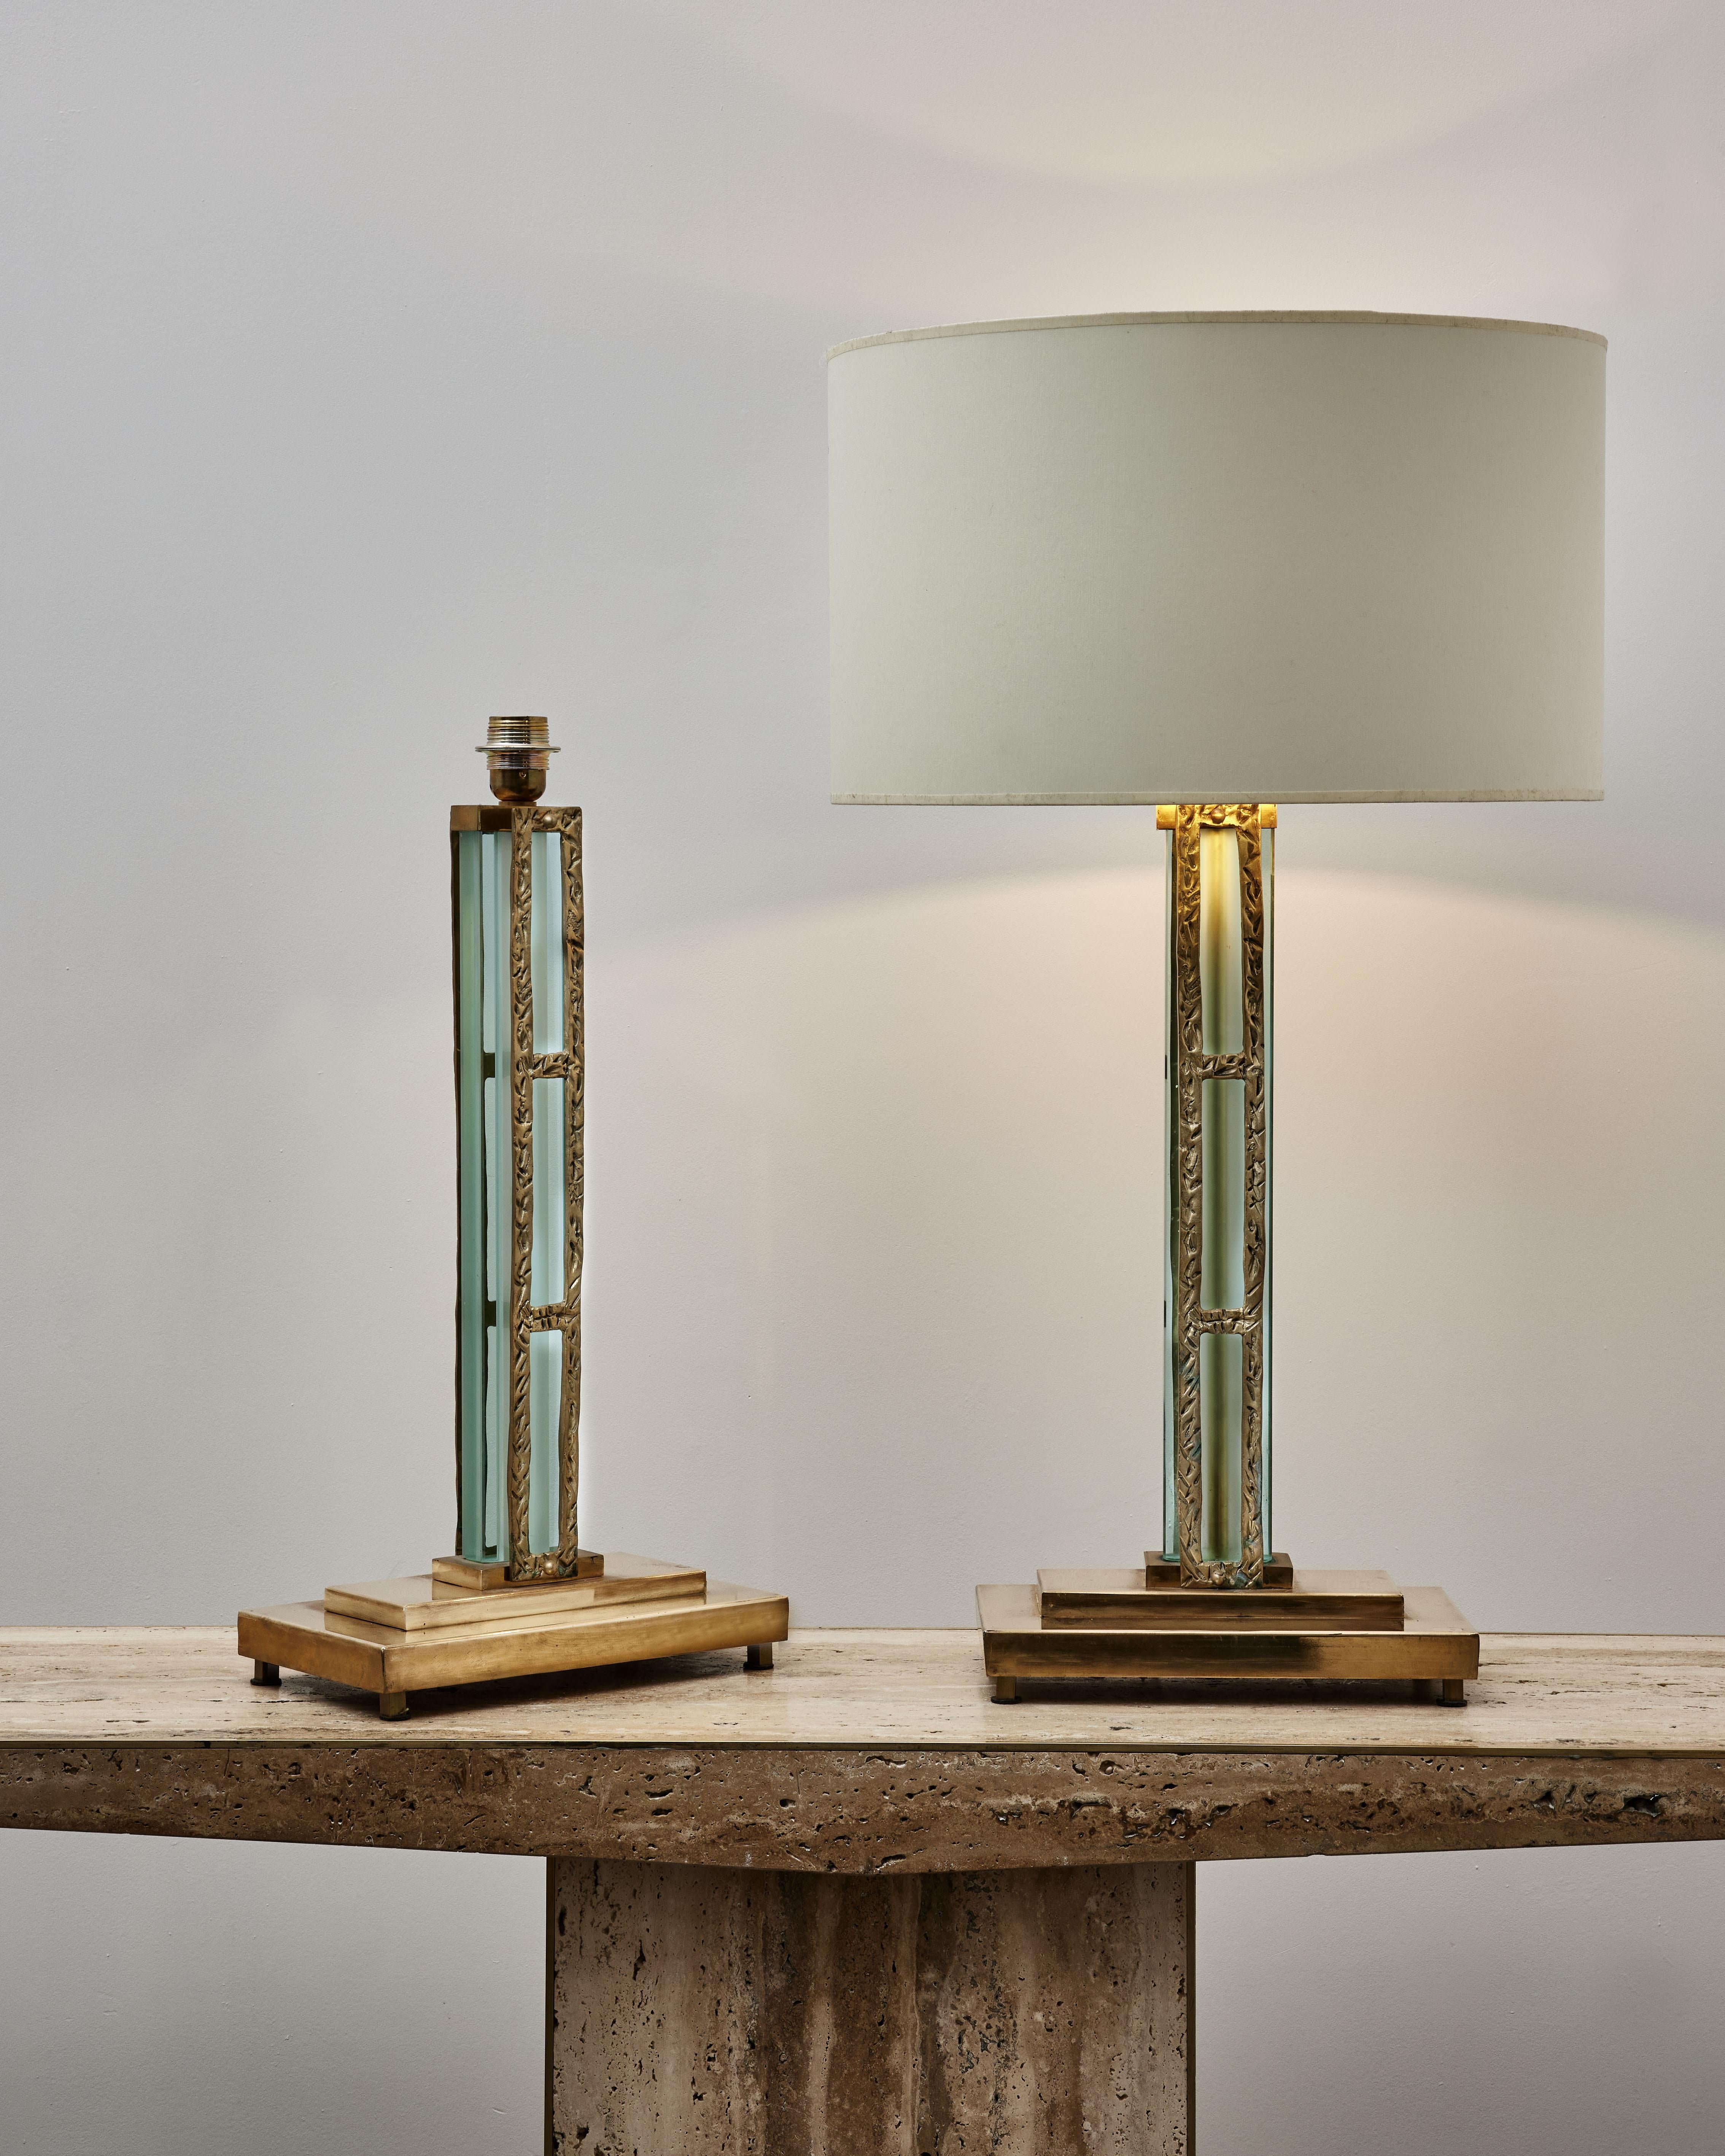 Pair of vintage table lamps in hammered brass and glass.
Italy, 1980s.

(Price and dimensions without shade)